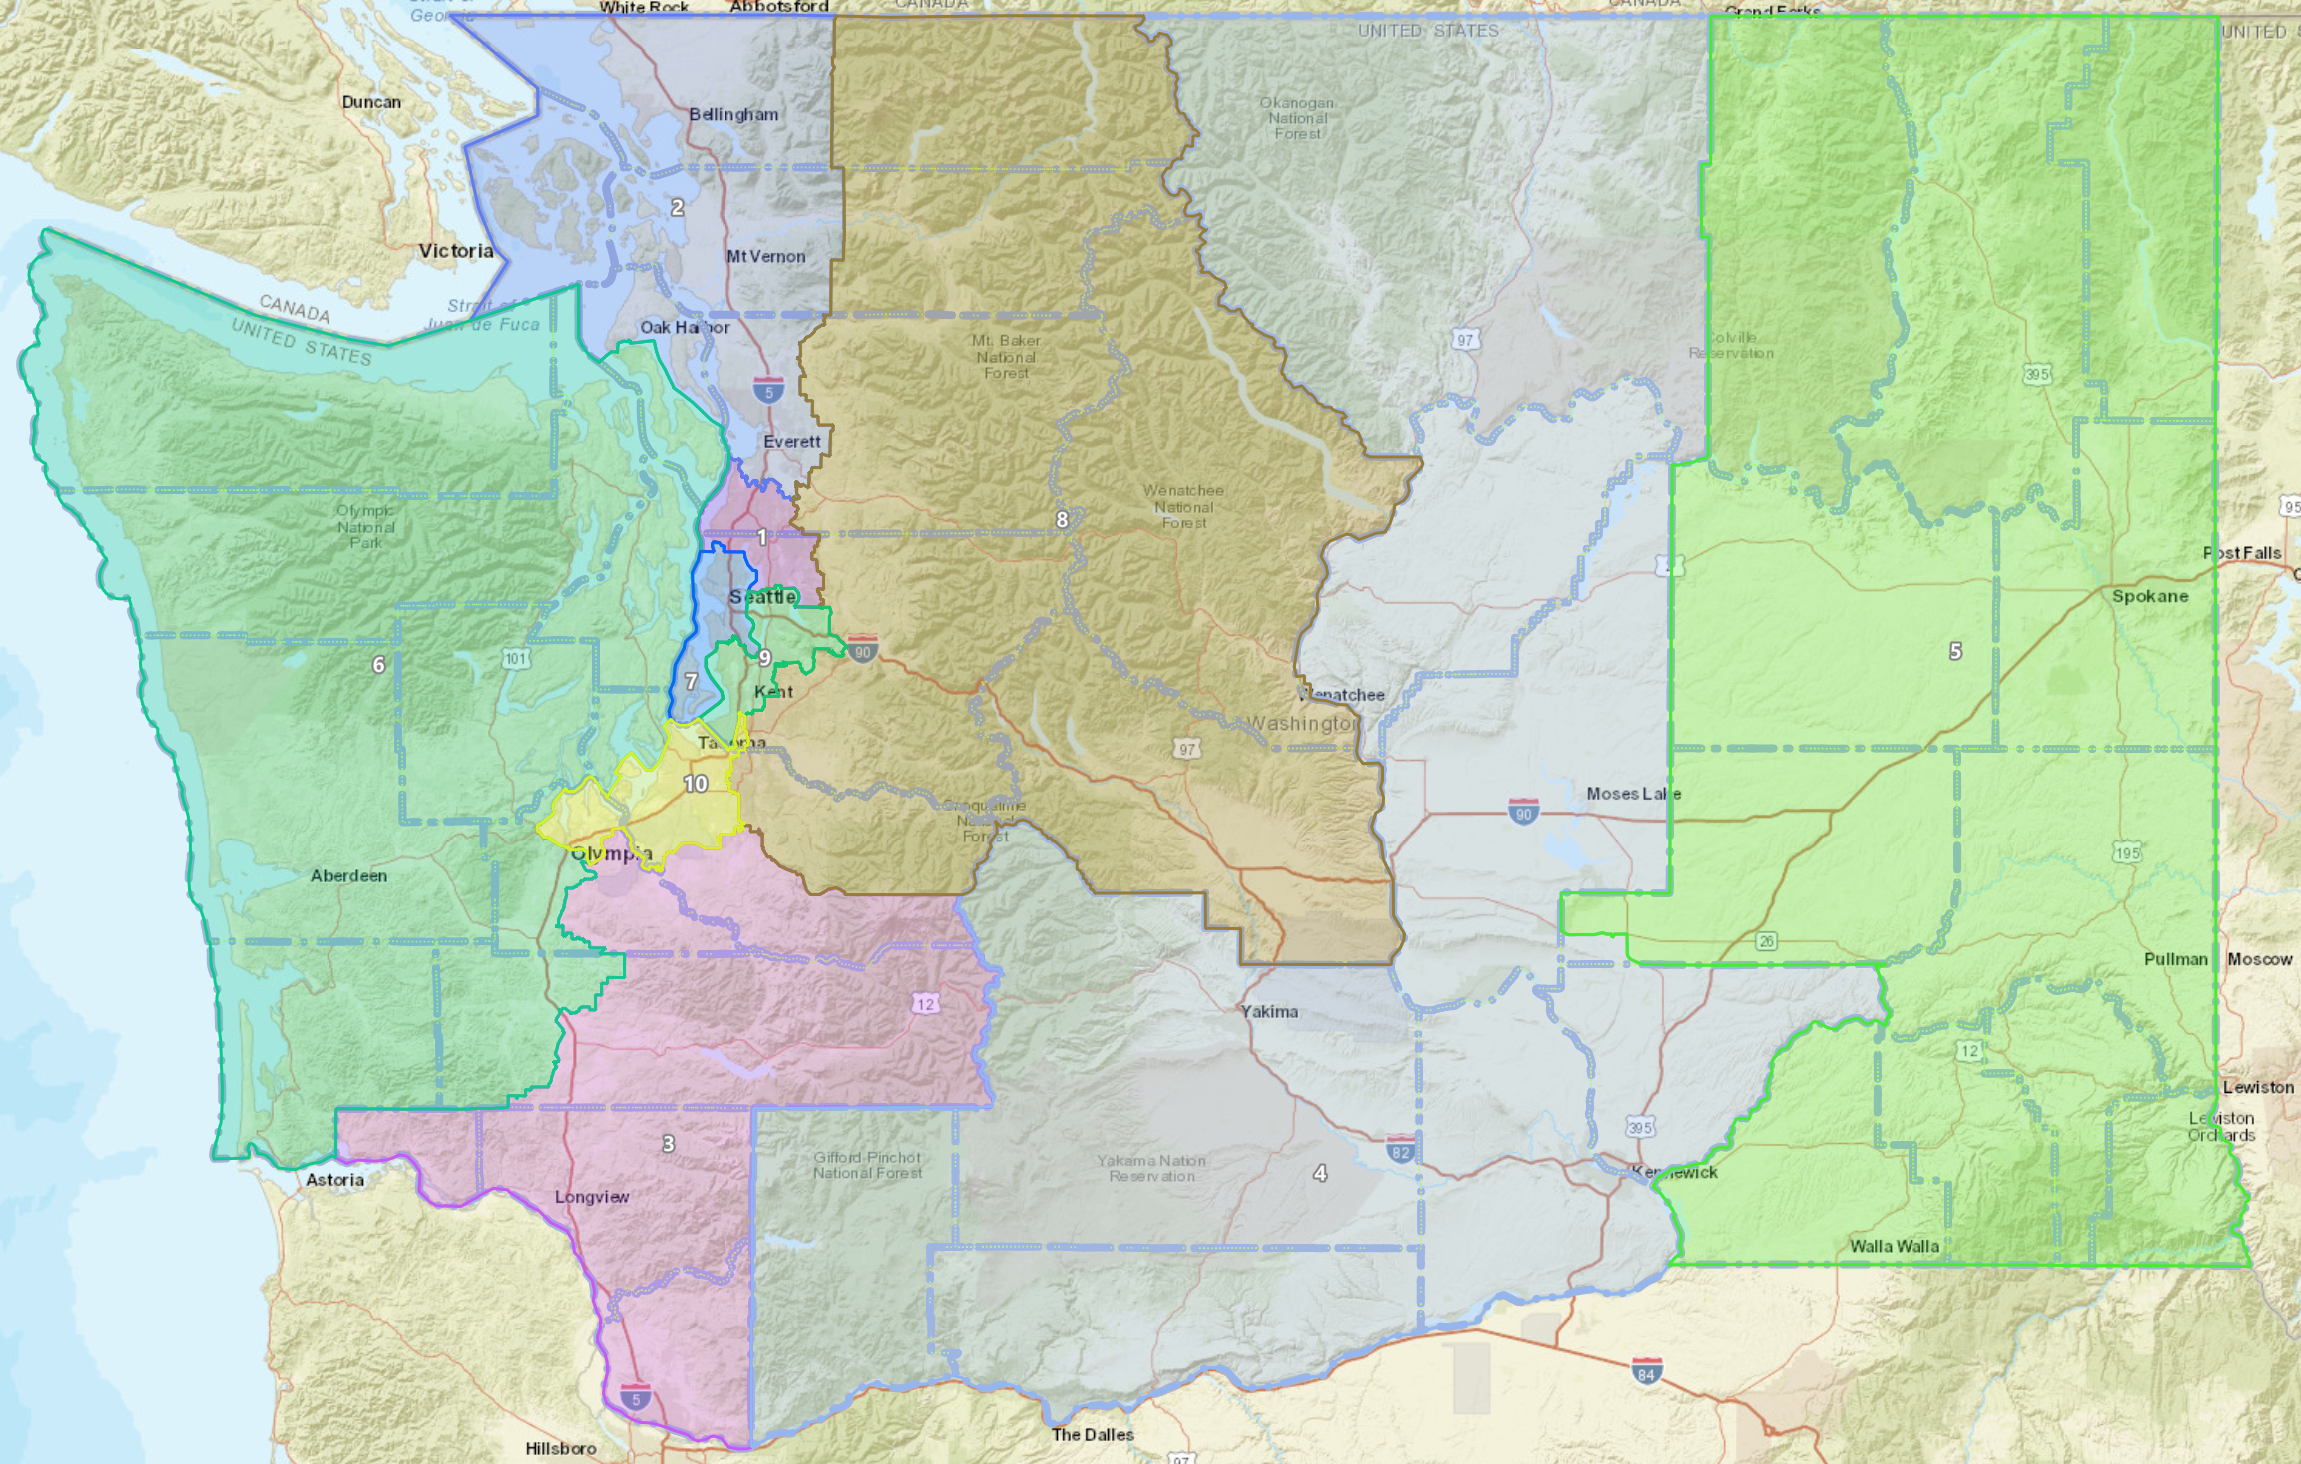 Commissioner Fain releases straightforward plan  for Washington’s new congressional districts